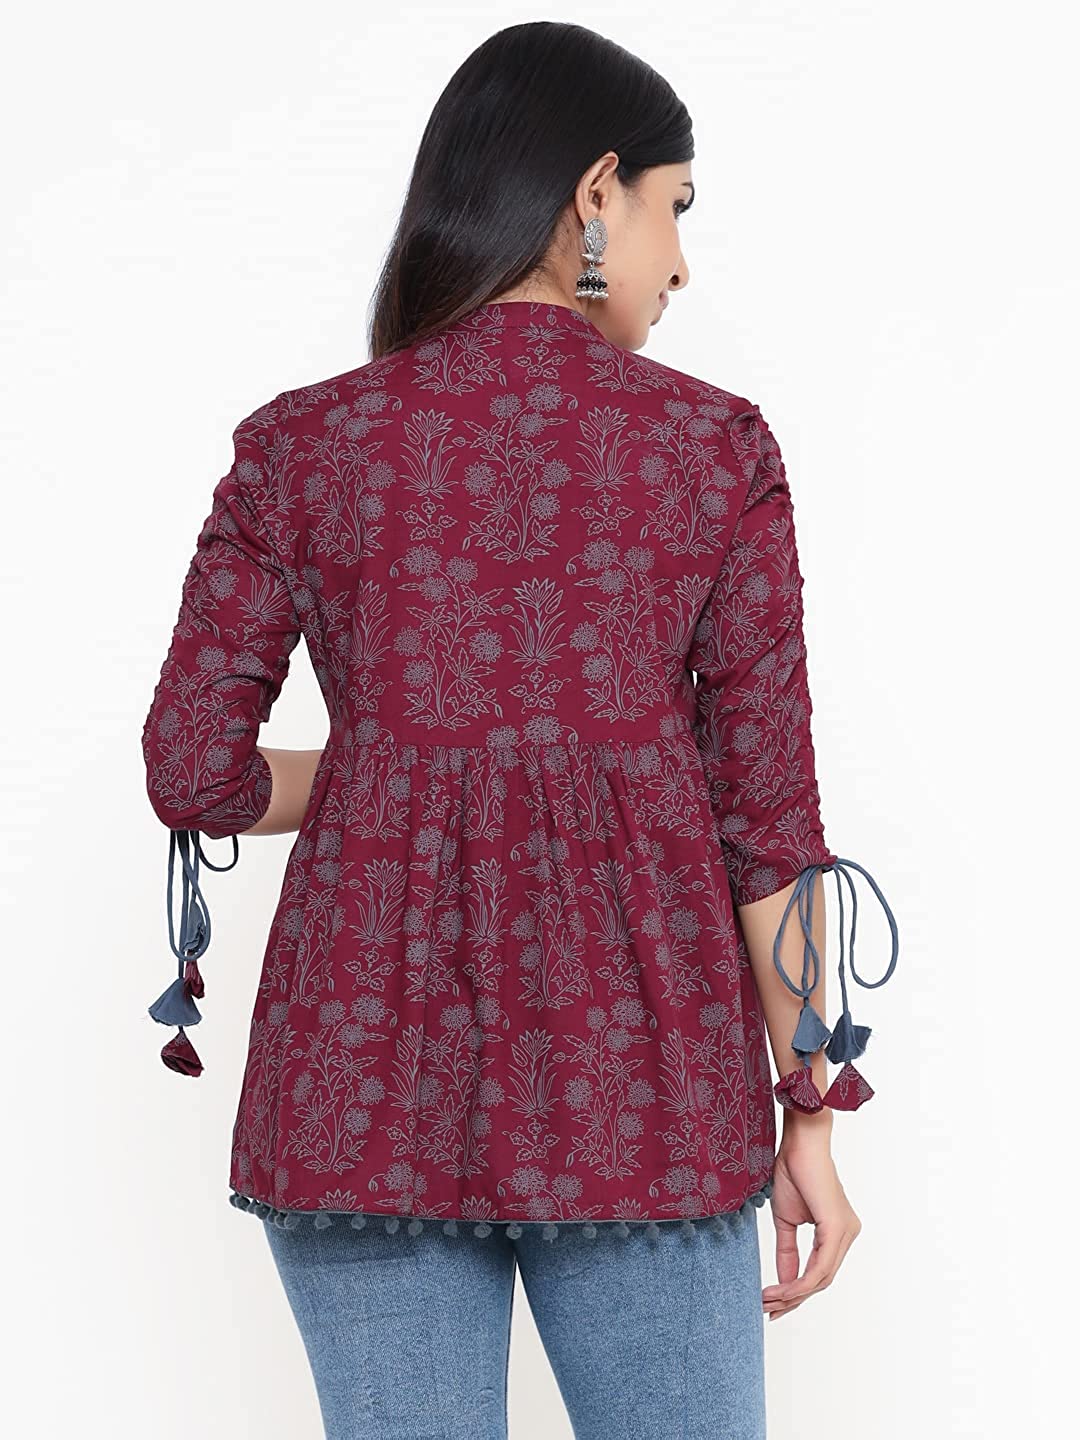 Women Rayon Floral Ethnic Top